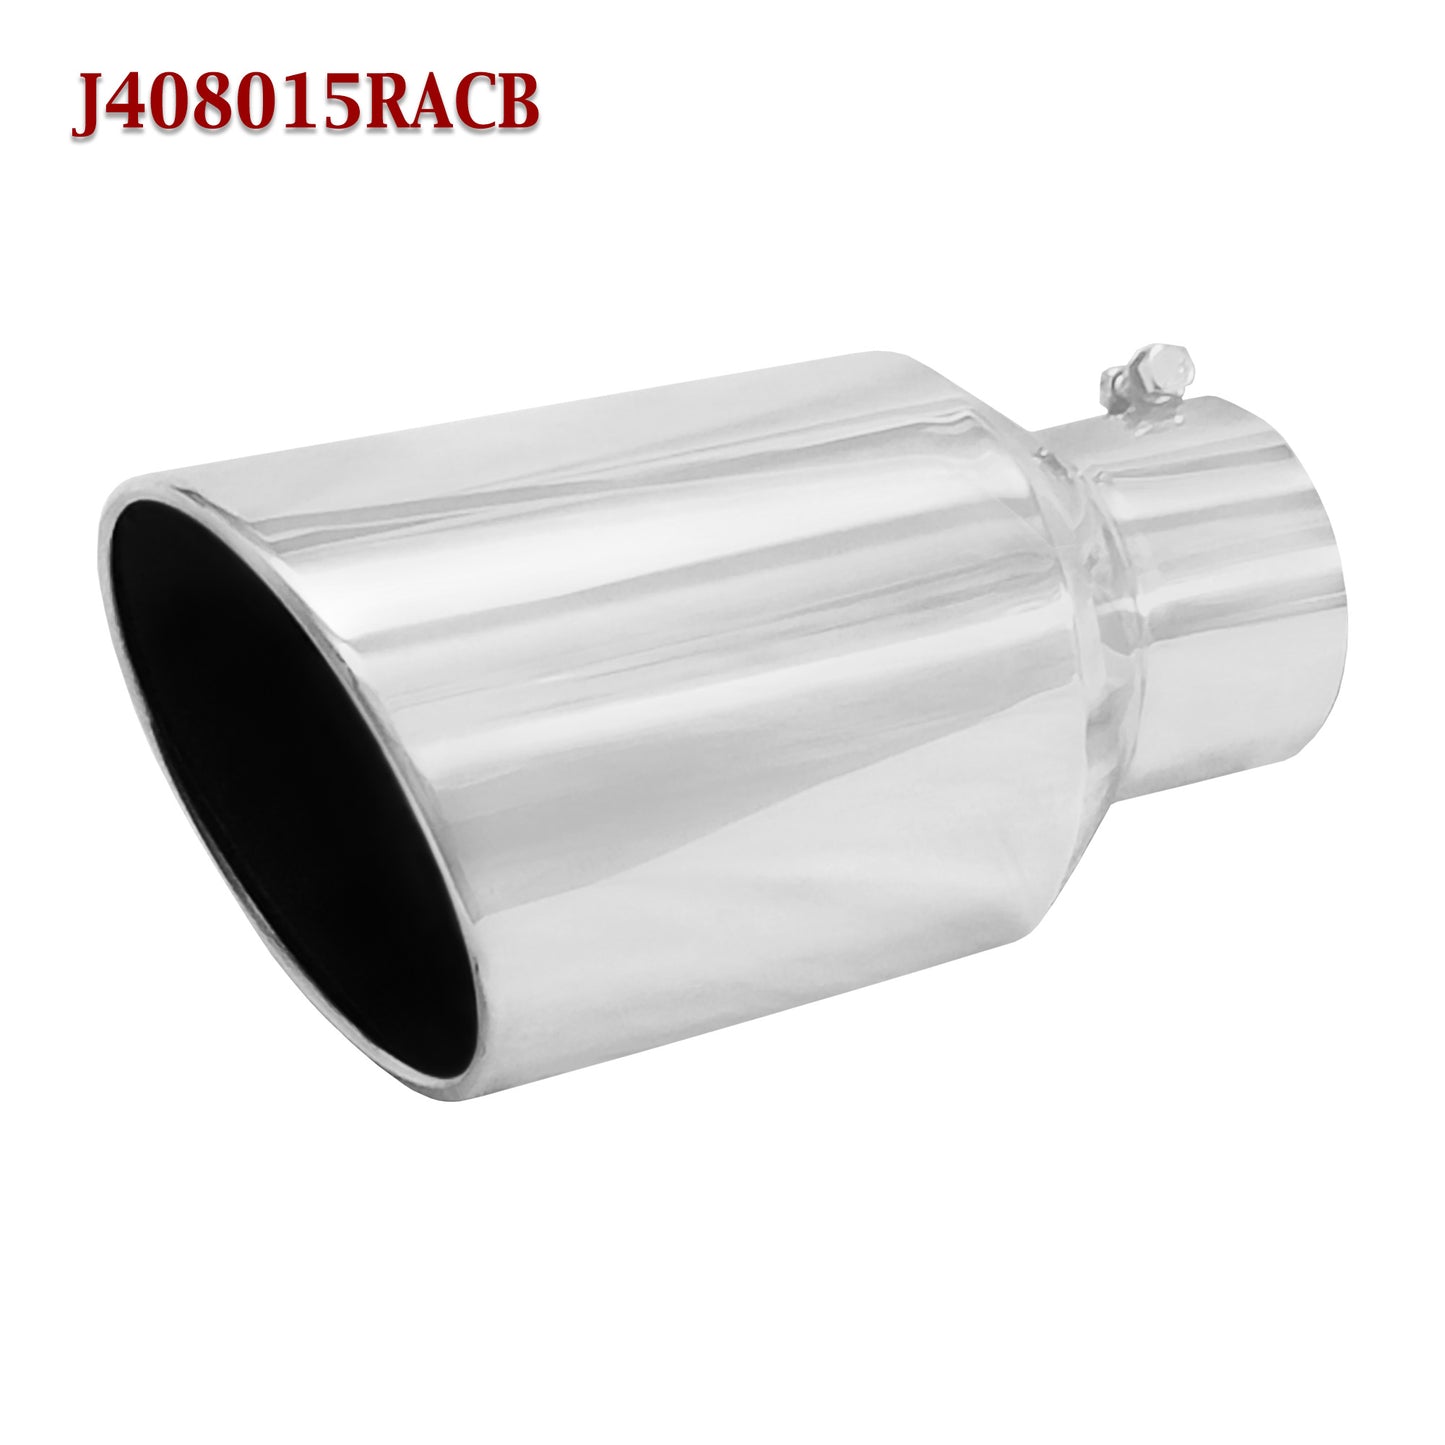 J408015RACB 4" Stainless Round Diesel Truck Bolt Exhaust Tip 8" Outlet 15" Long